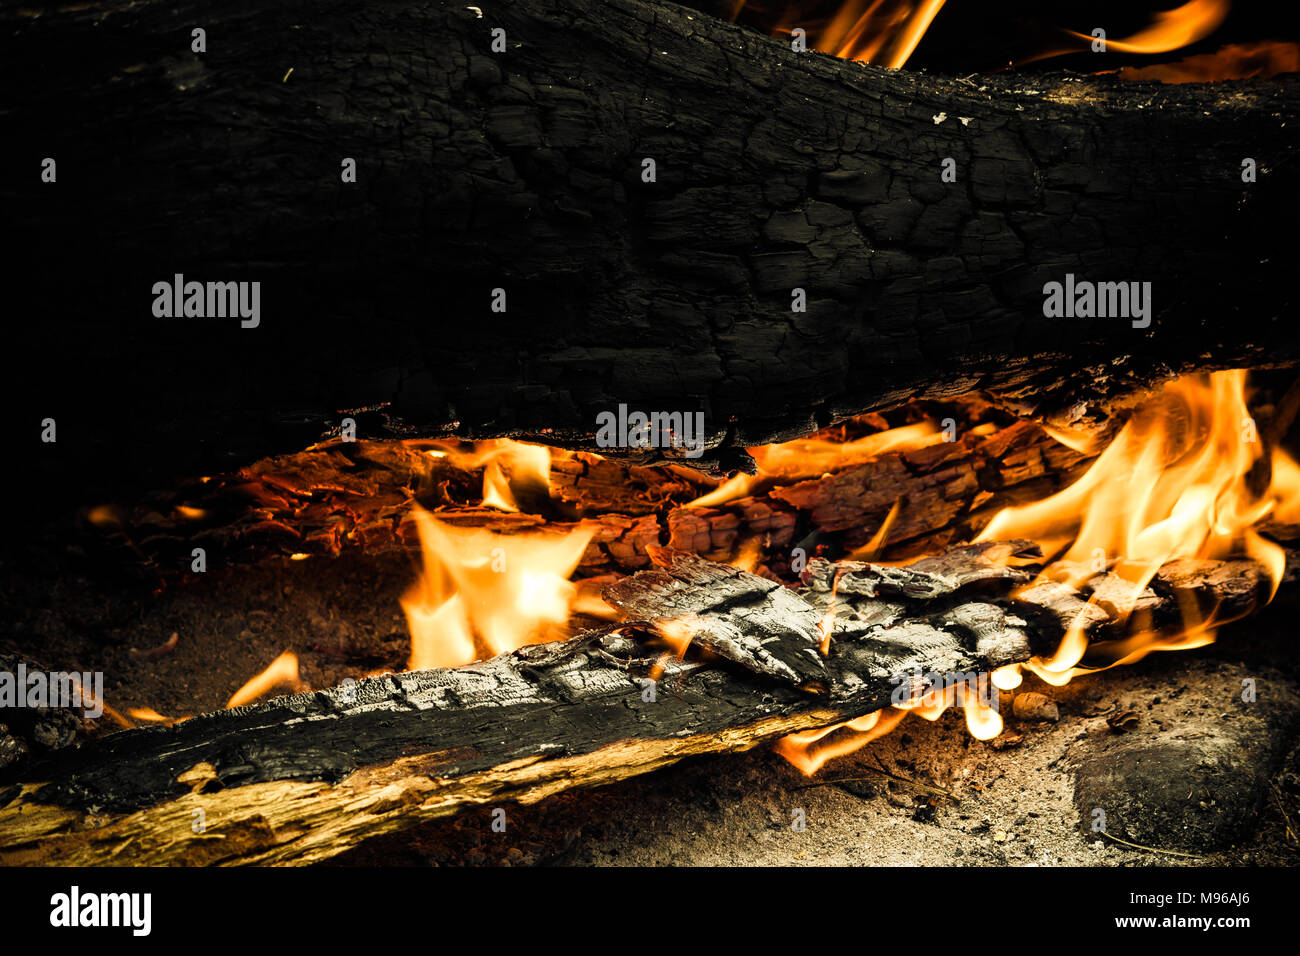 A large forest fire burns in the woods Stock Photo